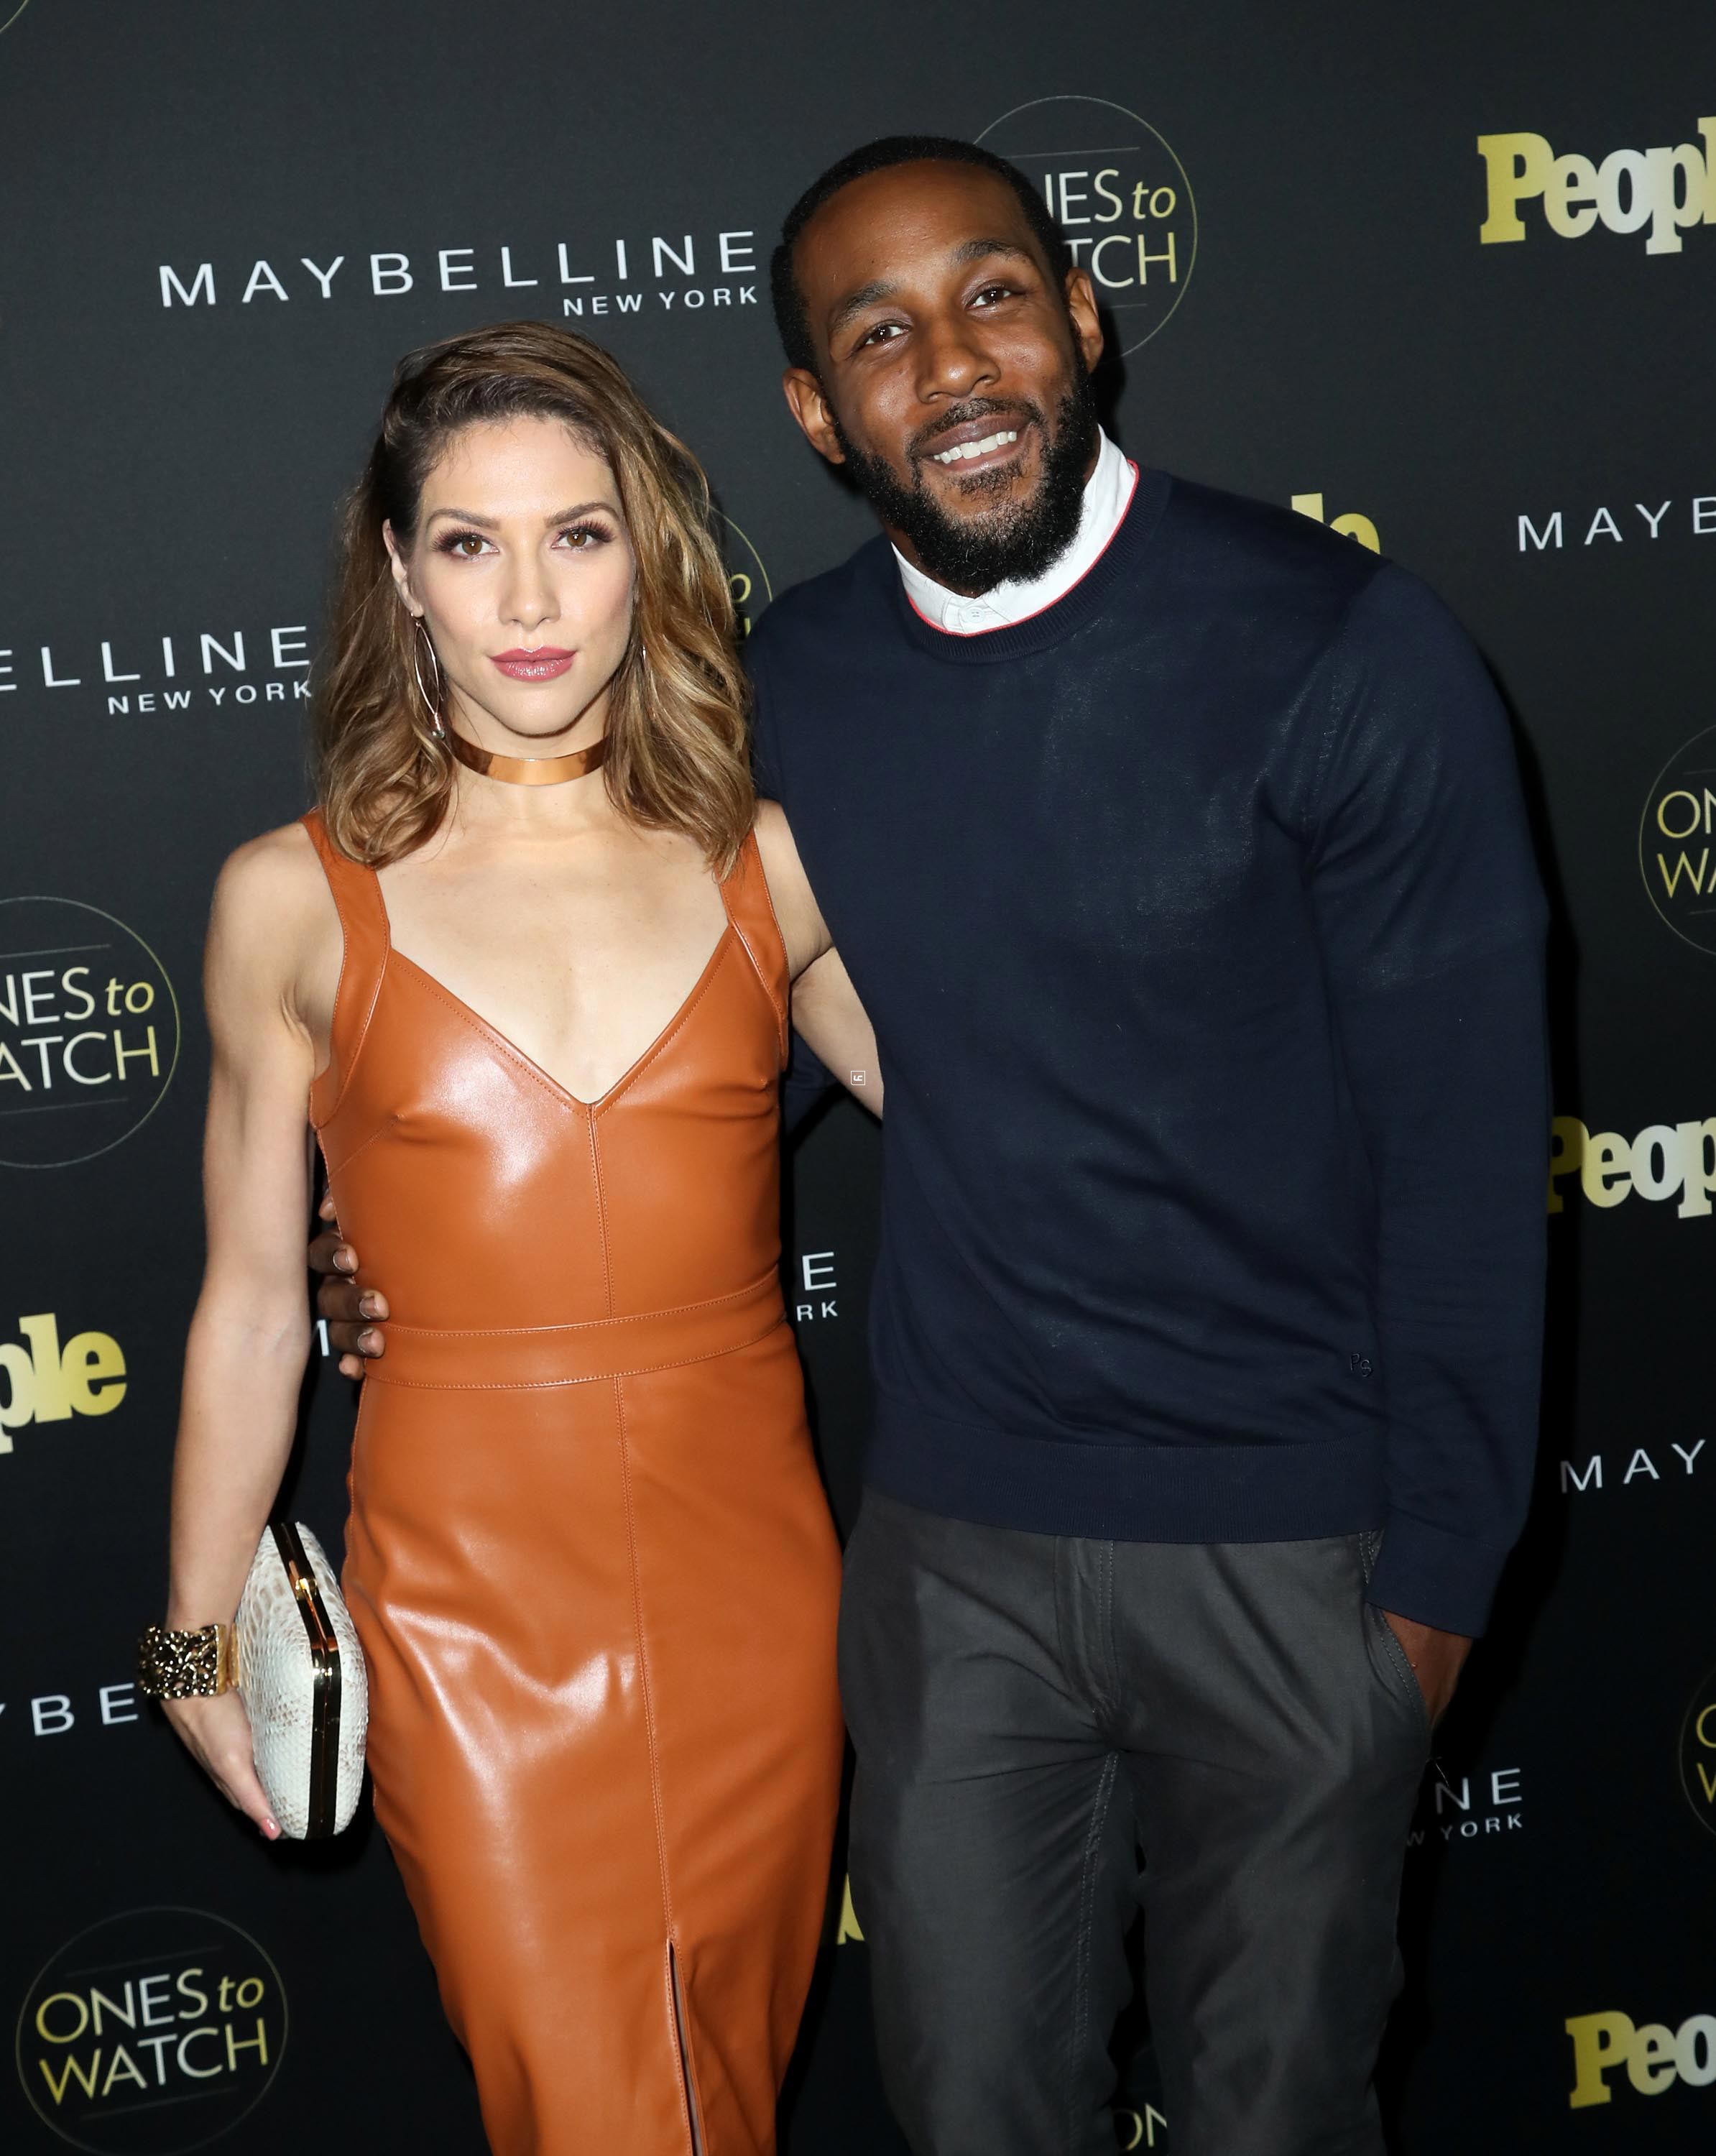 Allison Holker attends People’s ‘Ones To Watch’ party